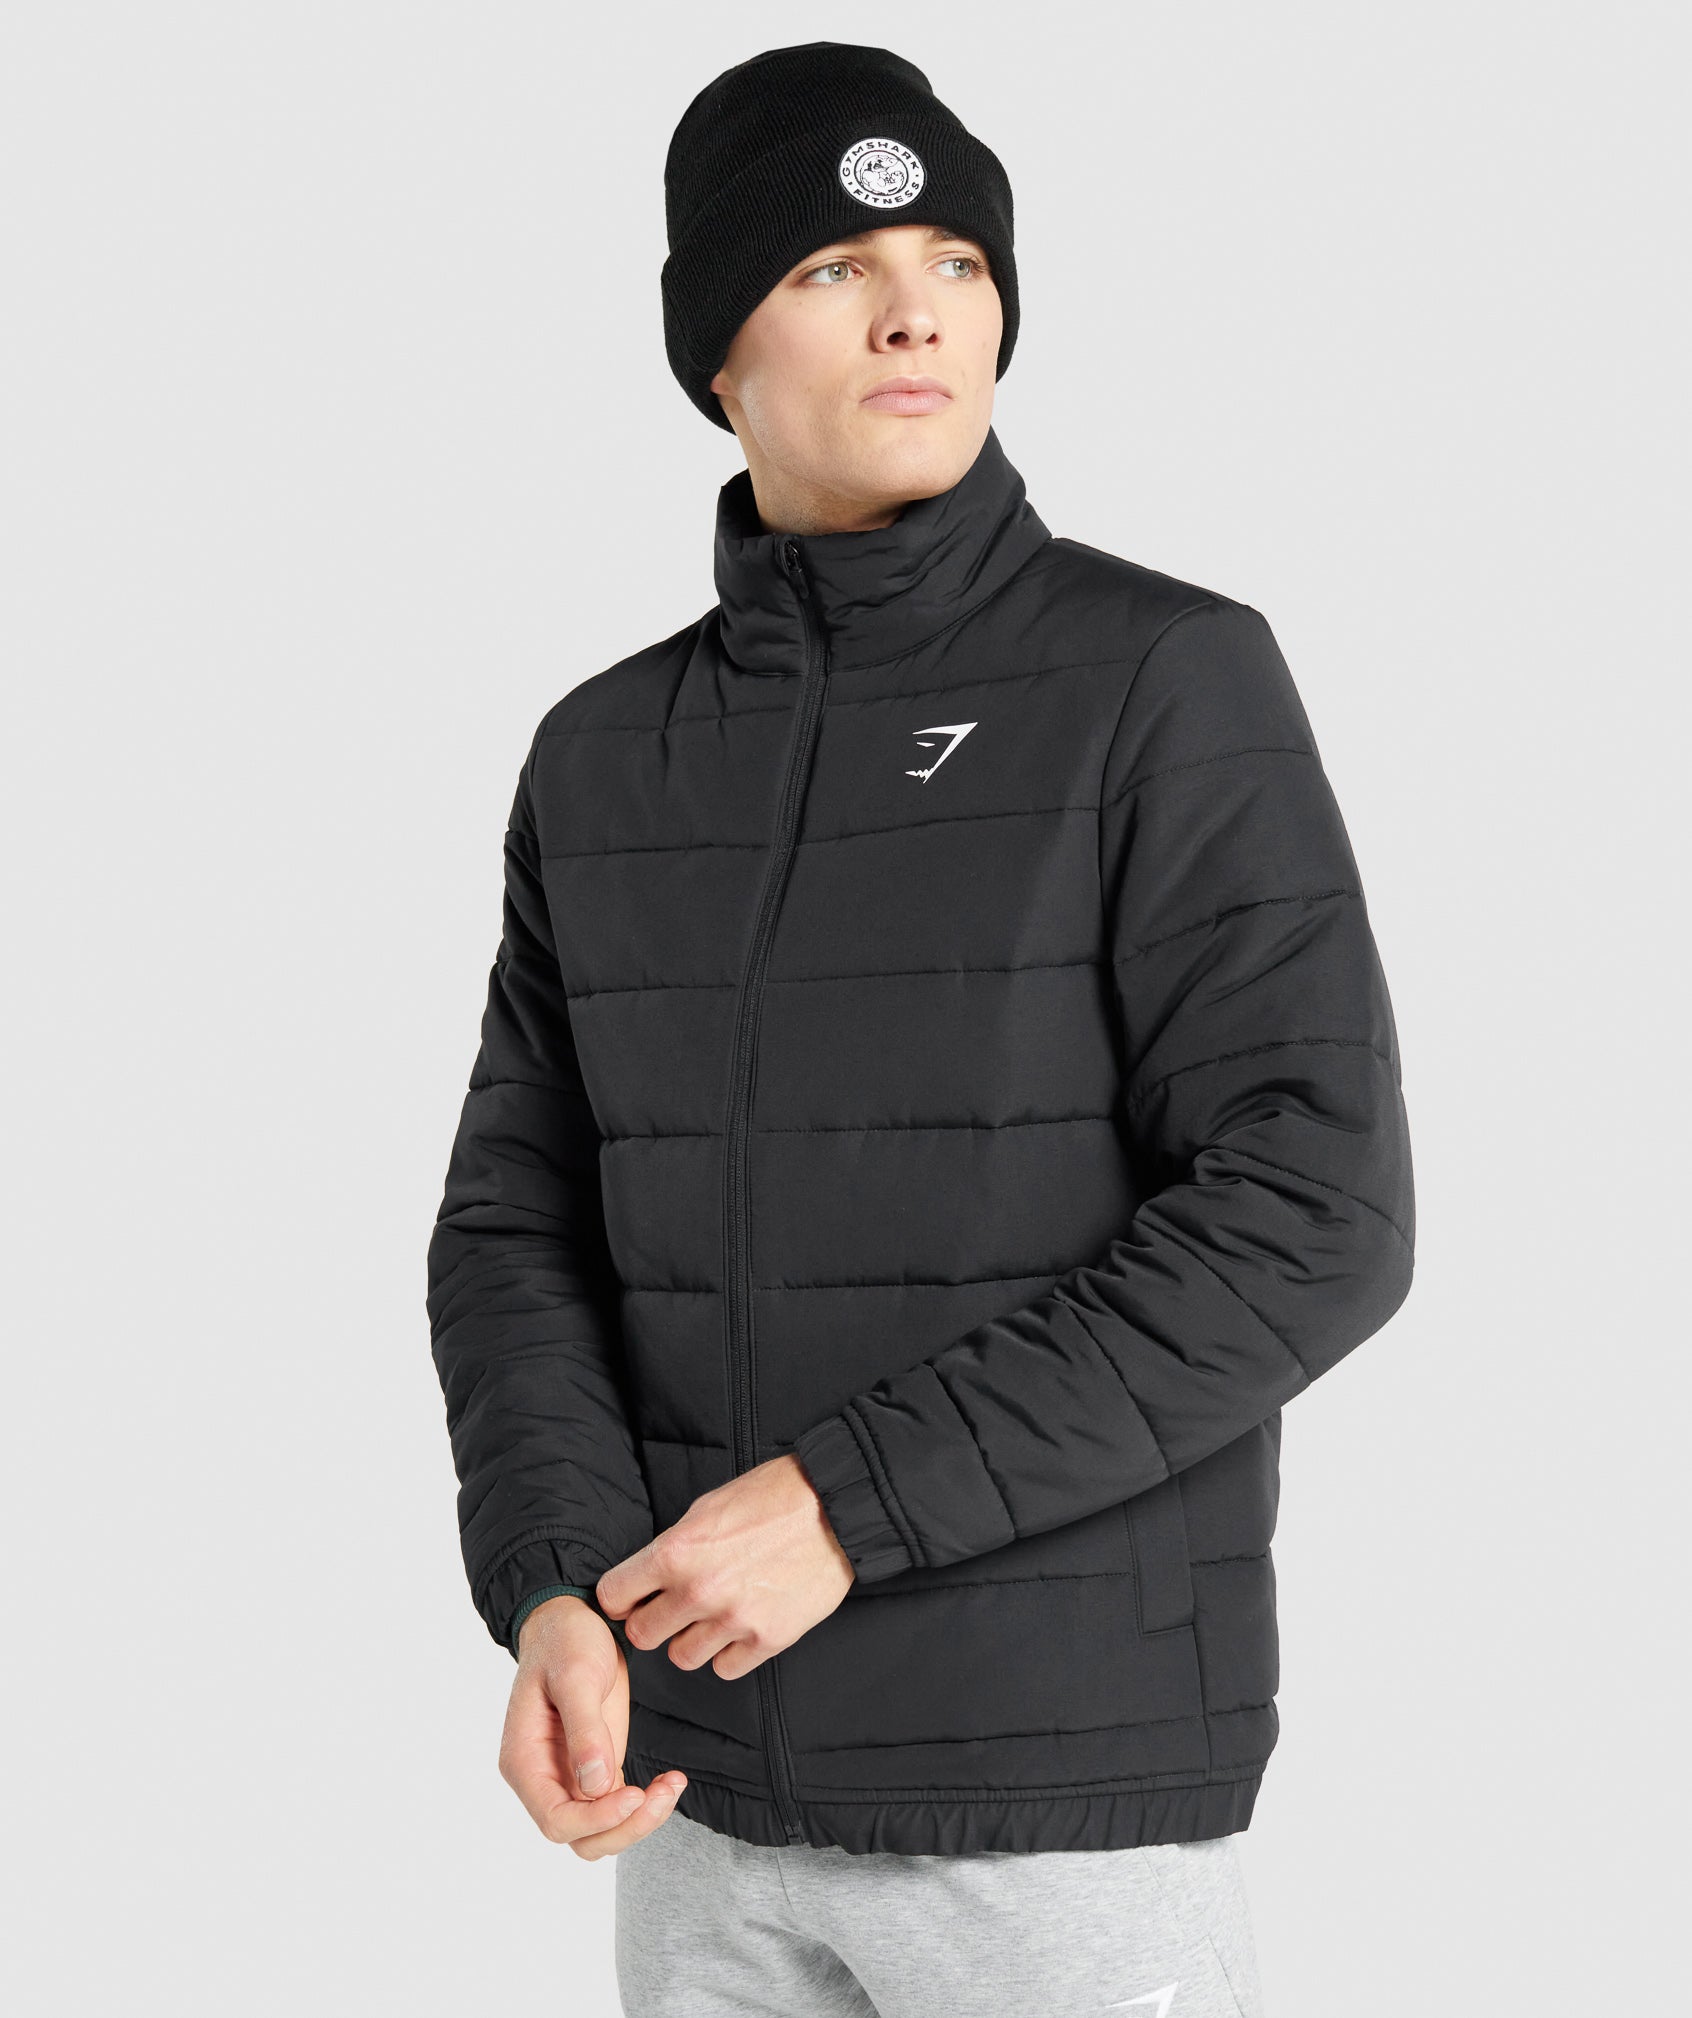 Crest Puffer Jacket in Black - view 1